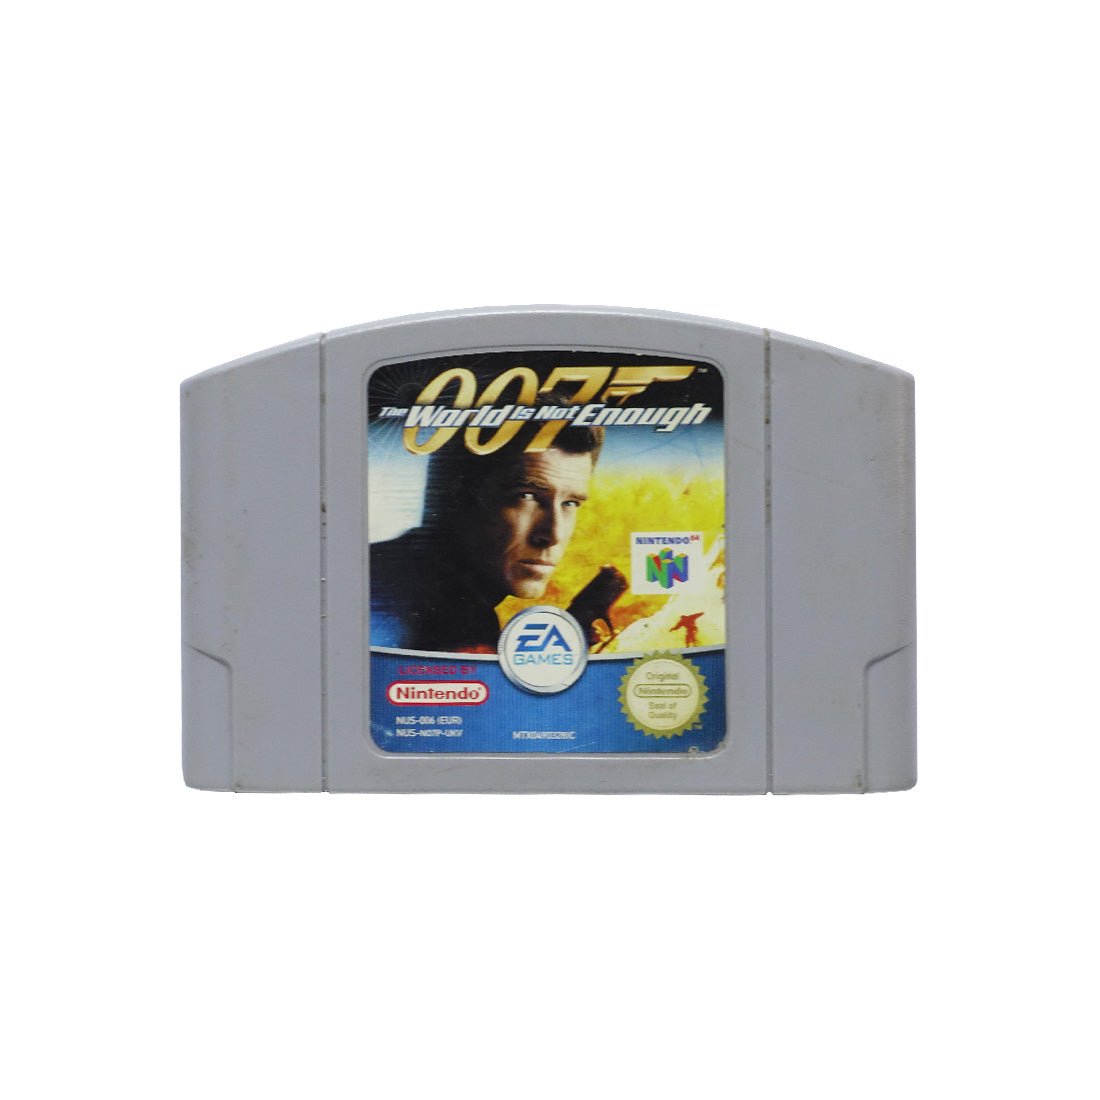 (Pre-Owned) 007 The World is not Enough - Nintendo 64 - ريترو - Store 974 | ستور ٩٧٤